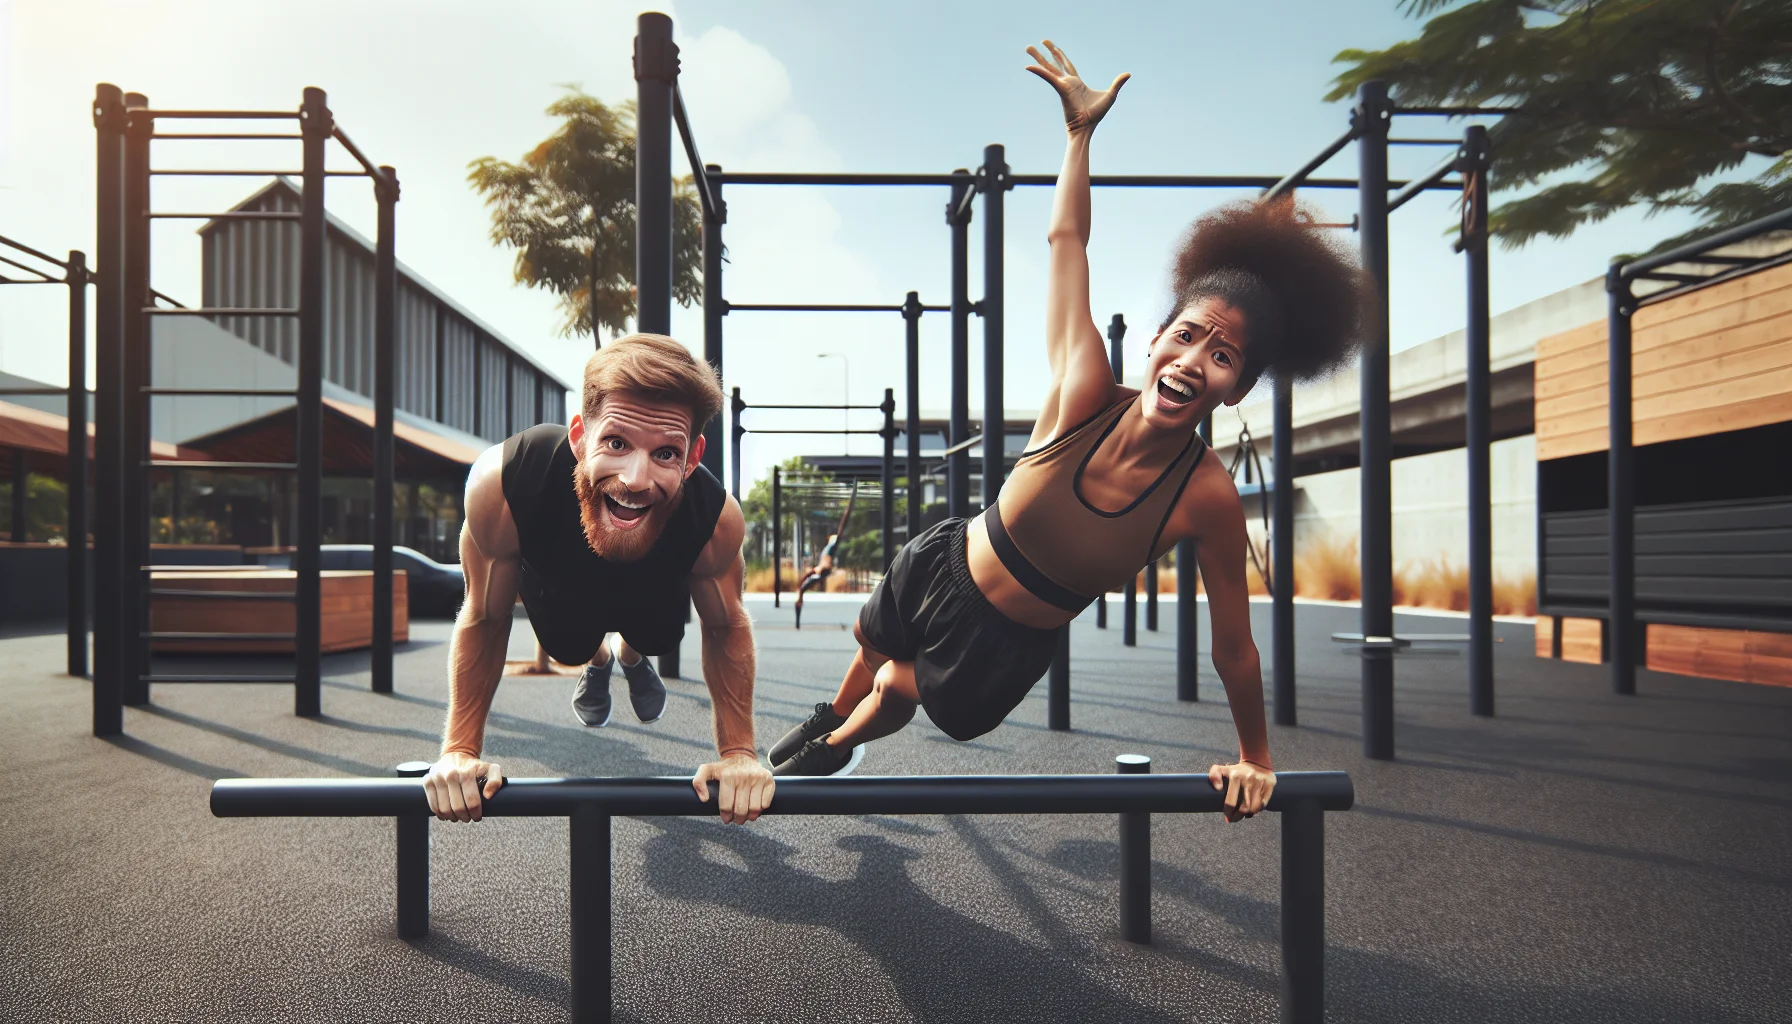 Generate a humorous and realistic image showcasing the disadvantages of calisthenics. Imagine a scenario where a Caucasian male and a black female are playfully struggling with complex bodyweight exercises such as planche and human flag. They are in a well-equipped outdoor fitness park, with their expressions revealing slight frustration. Despite the difficulty, they seem motivated and determined, suggesting a positive and enticing message towards exercising and overcoming its challenges.